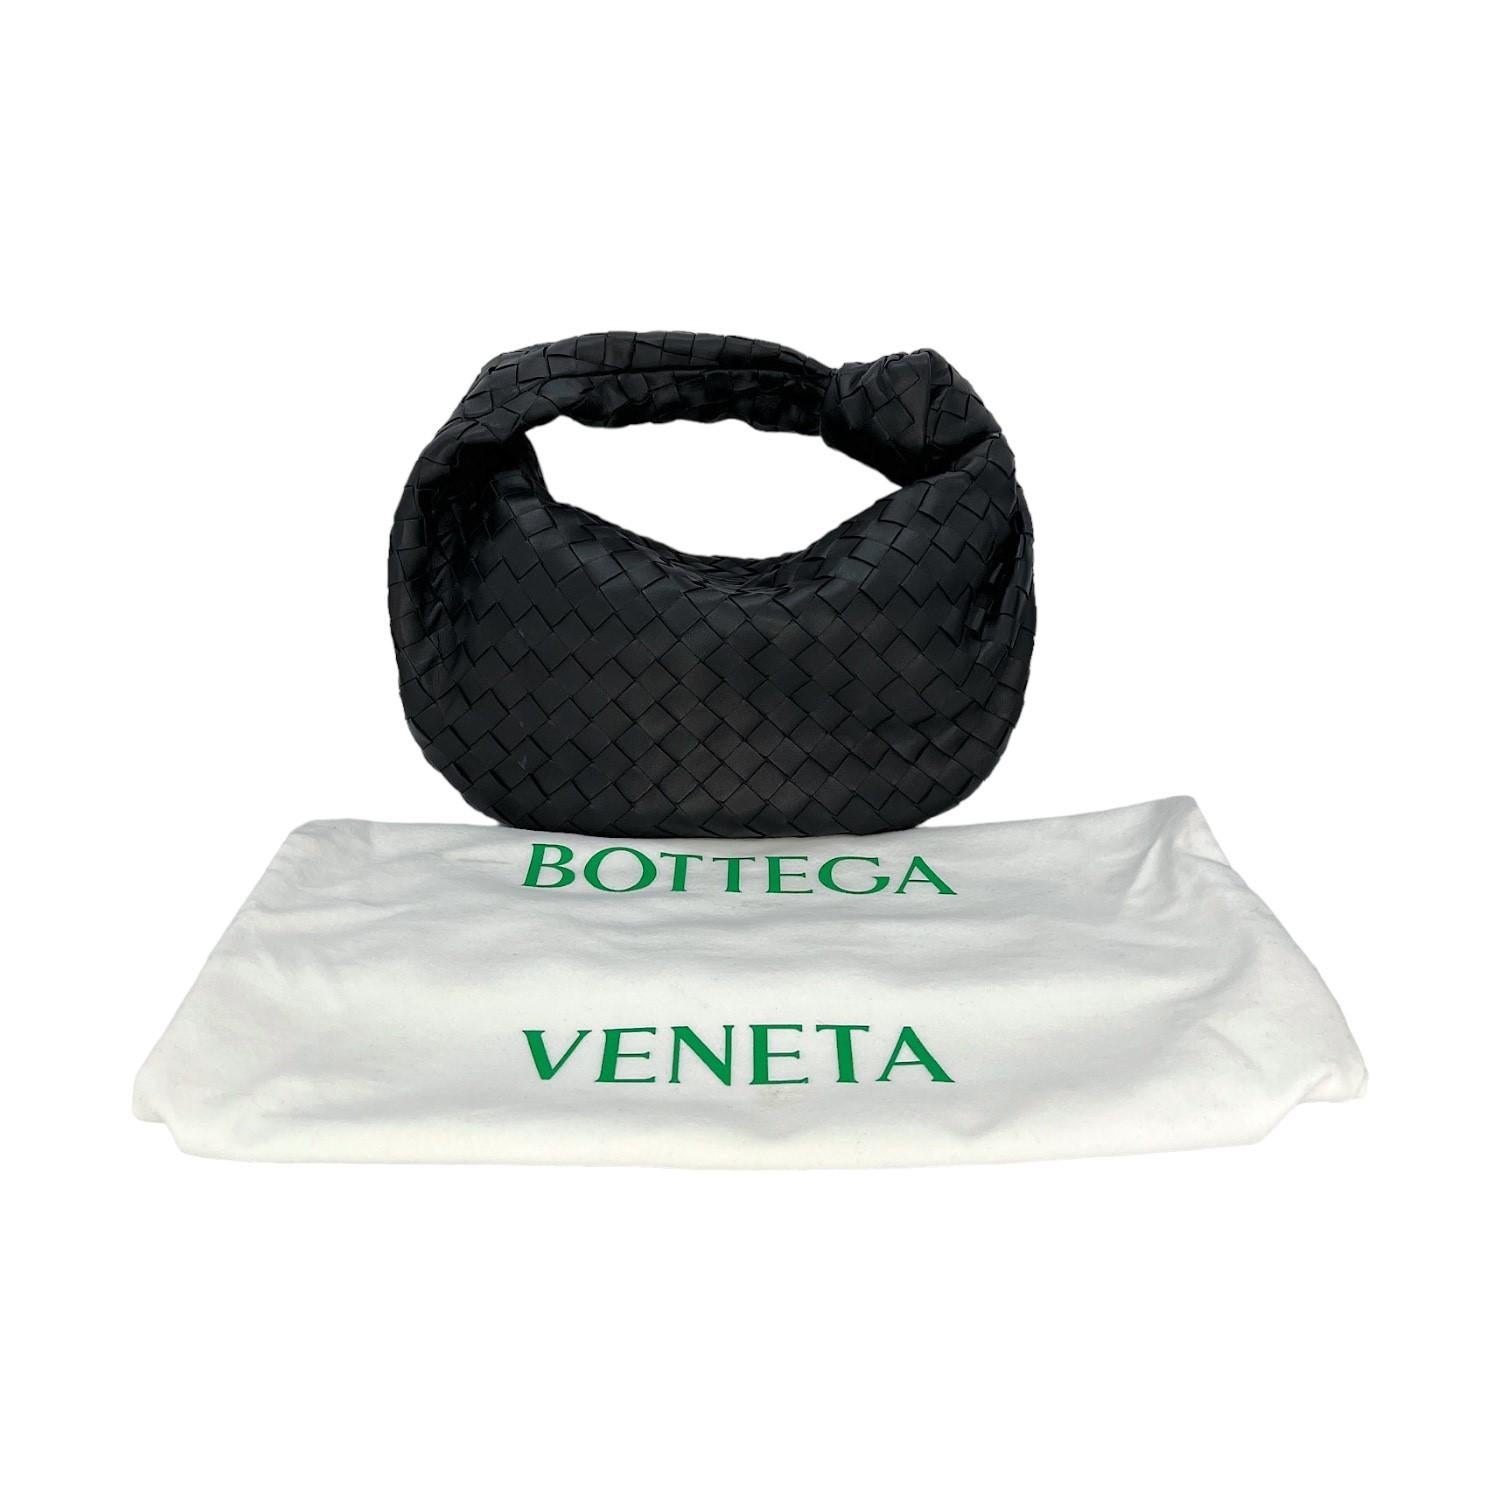 This Bottega Veneta Intrecciato Teen Jodie was made in Italy and it is finely crafted of a woven black leather exterior with silver-tone hardware features. It has a woven black leather top handle. It has a zipper closure that opens up to a spacious